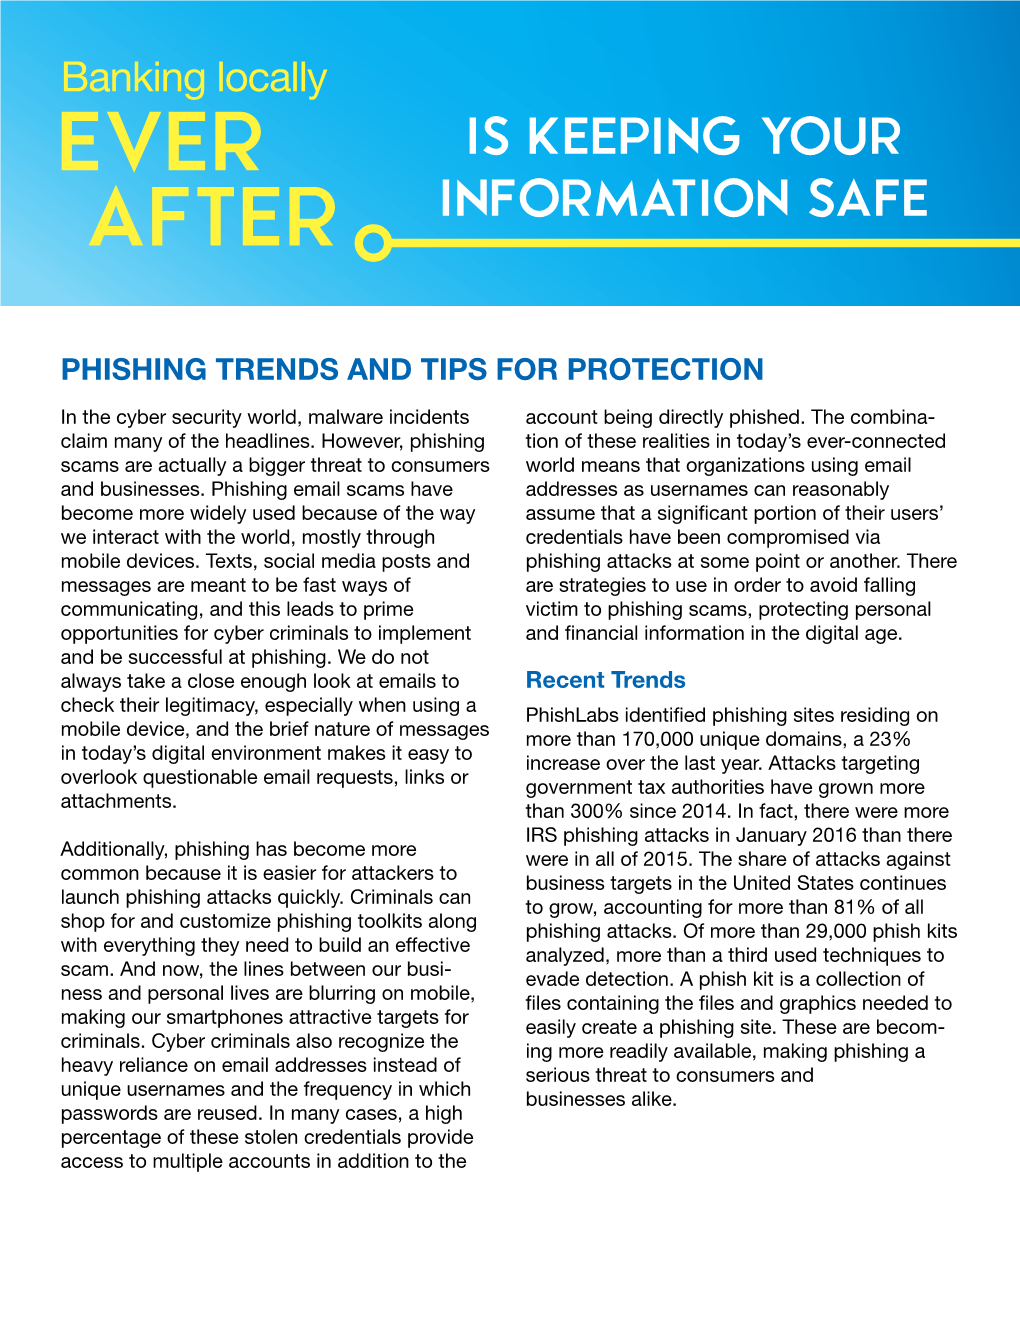 Phishing Trends and Tips for Protection